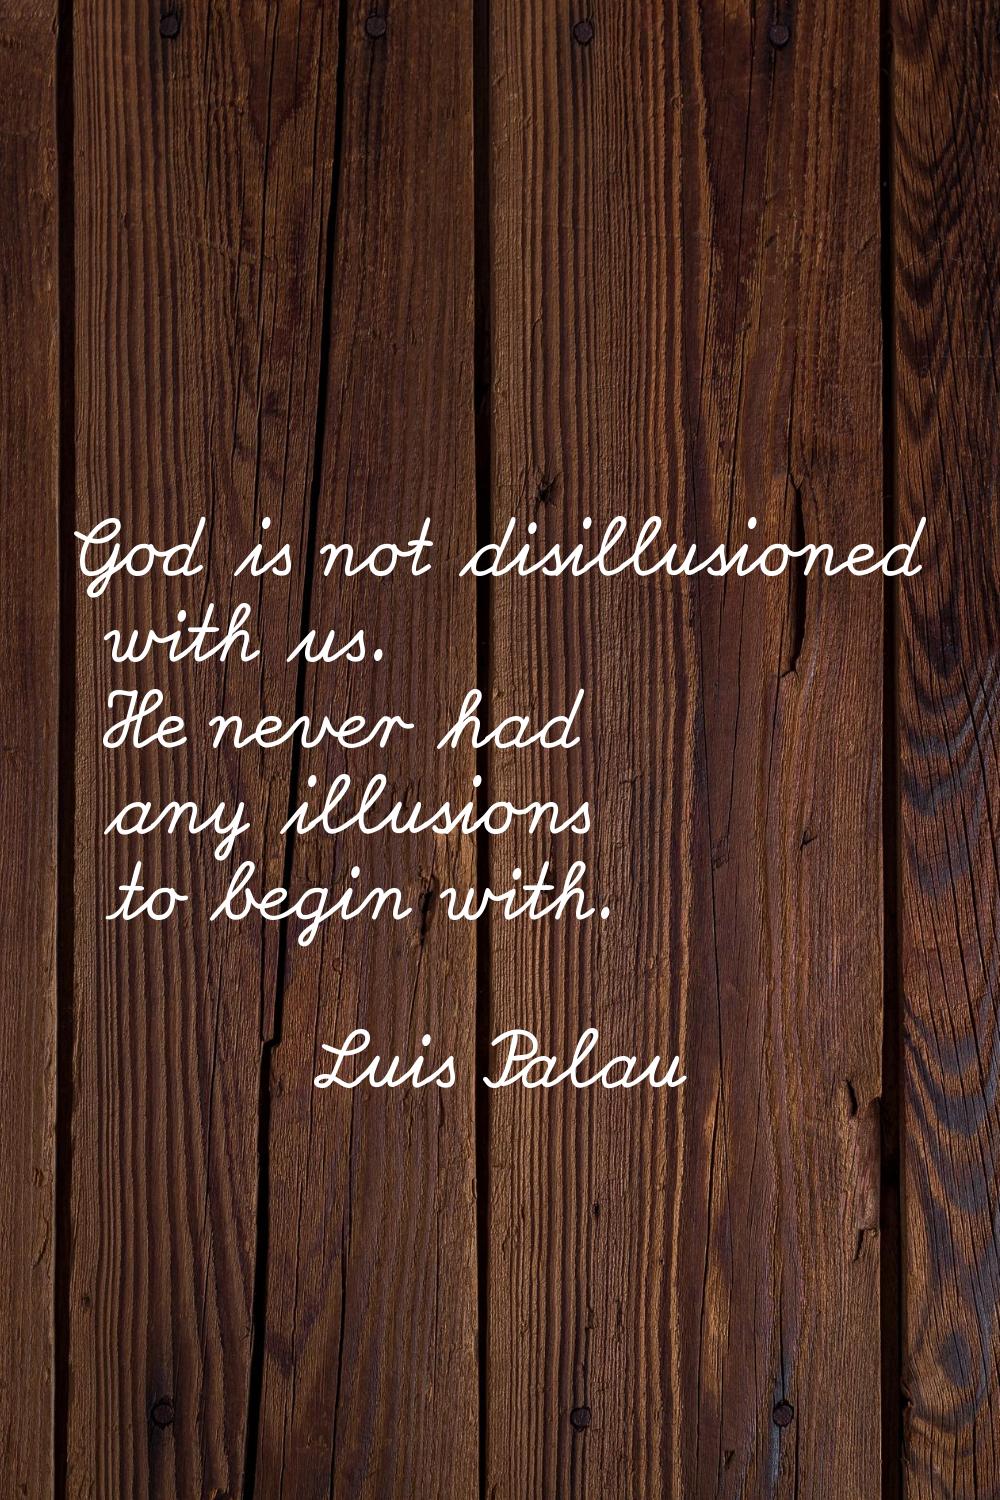 God is not disillusioned with us. He never had any illusions to begin with.